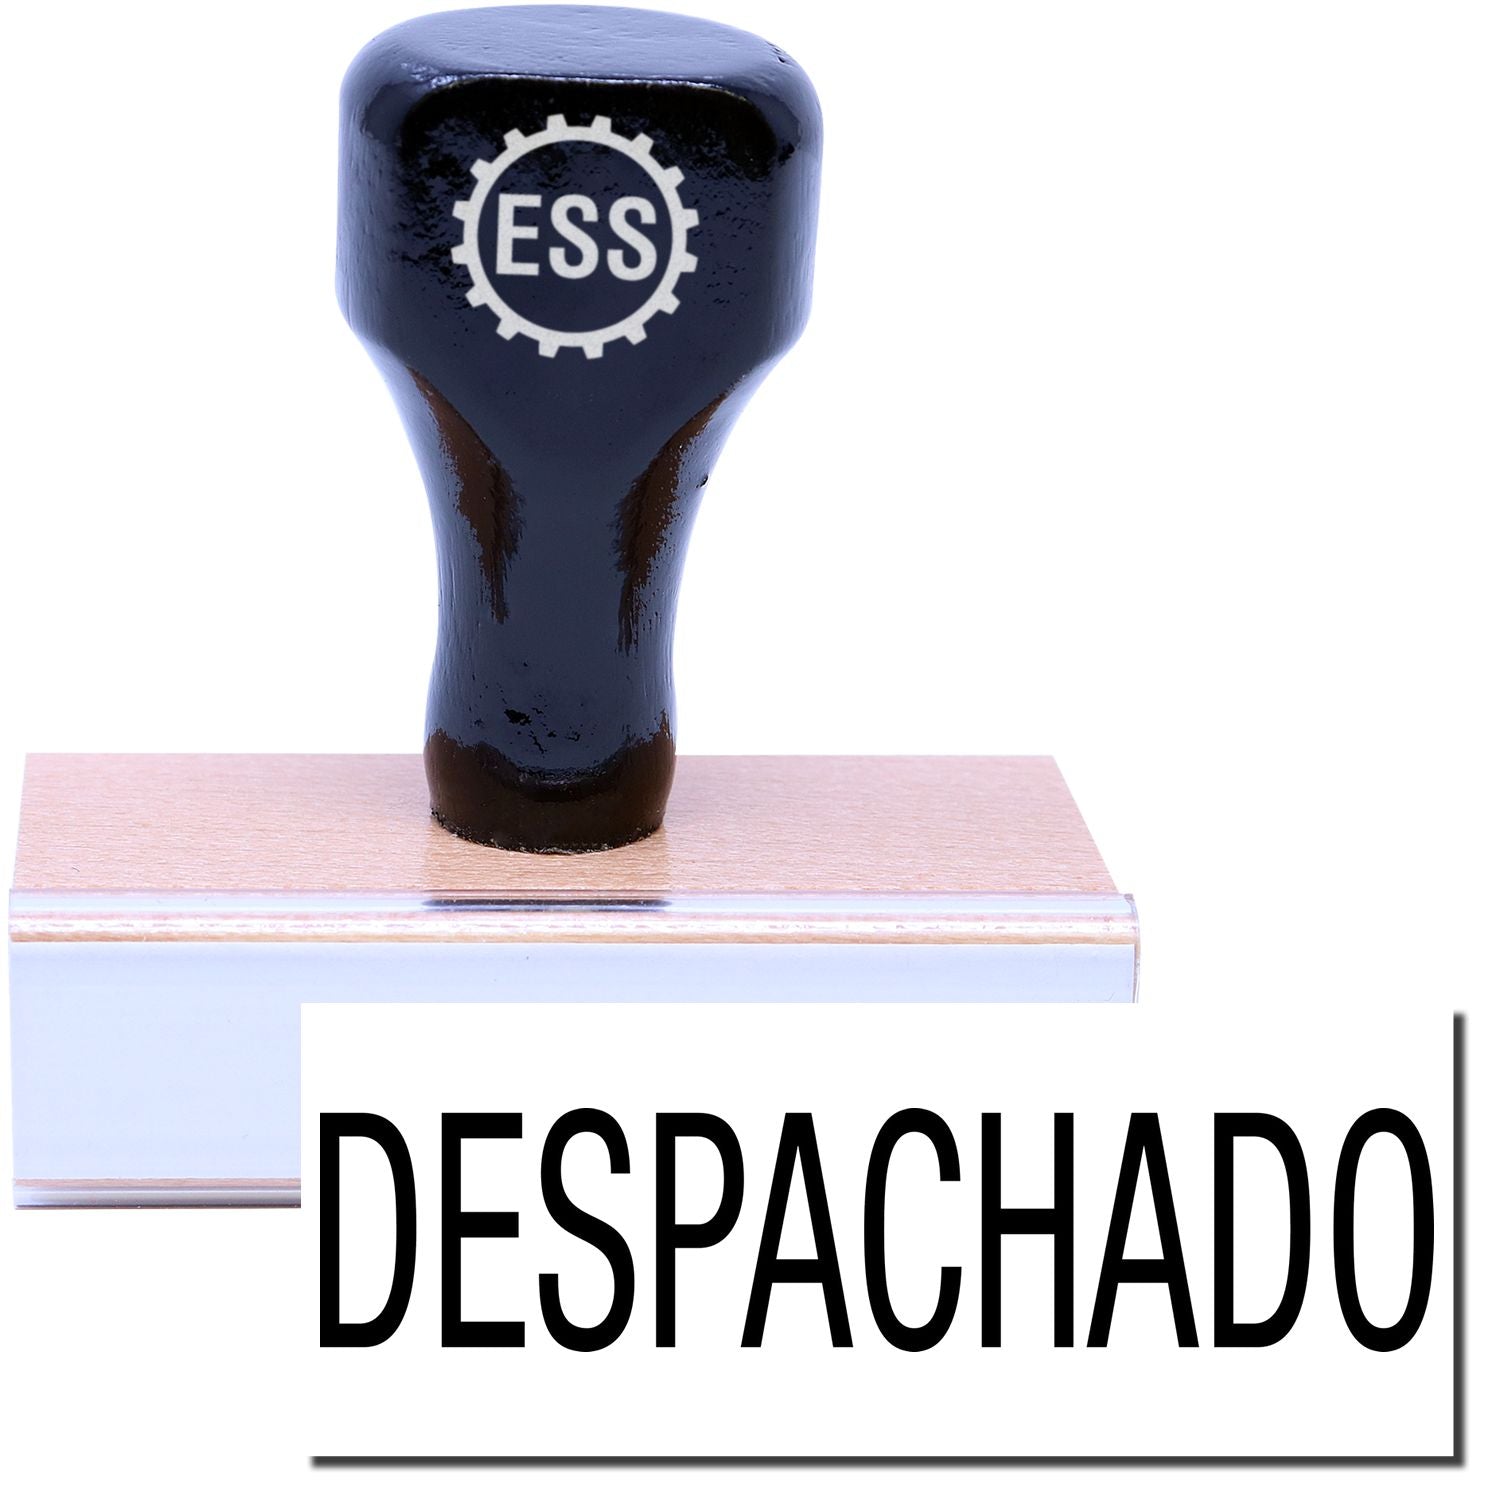 A stock office rubber stamp with a stamped image showing how the text "DESPACHADO" is displayed after stamping.